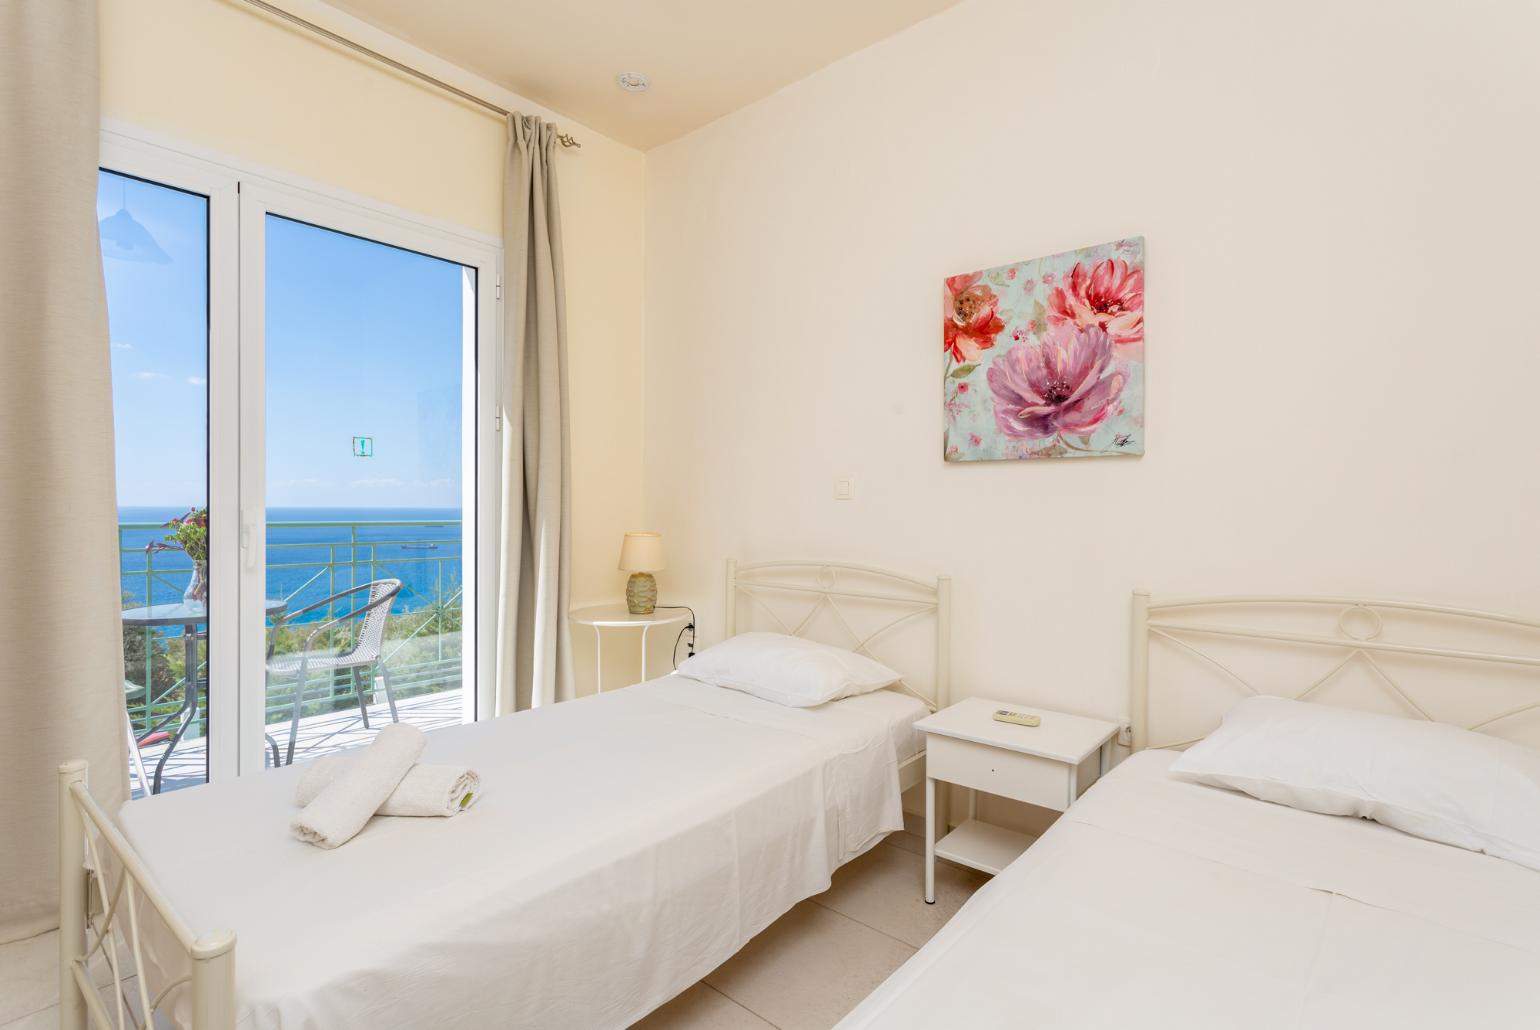 Twin bedroom with en suite bathroom, A/C, and upper terrace access with panoramic sea views